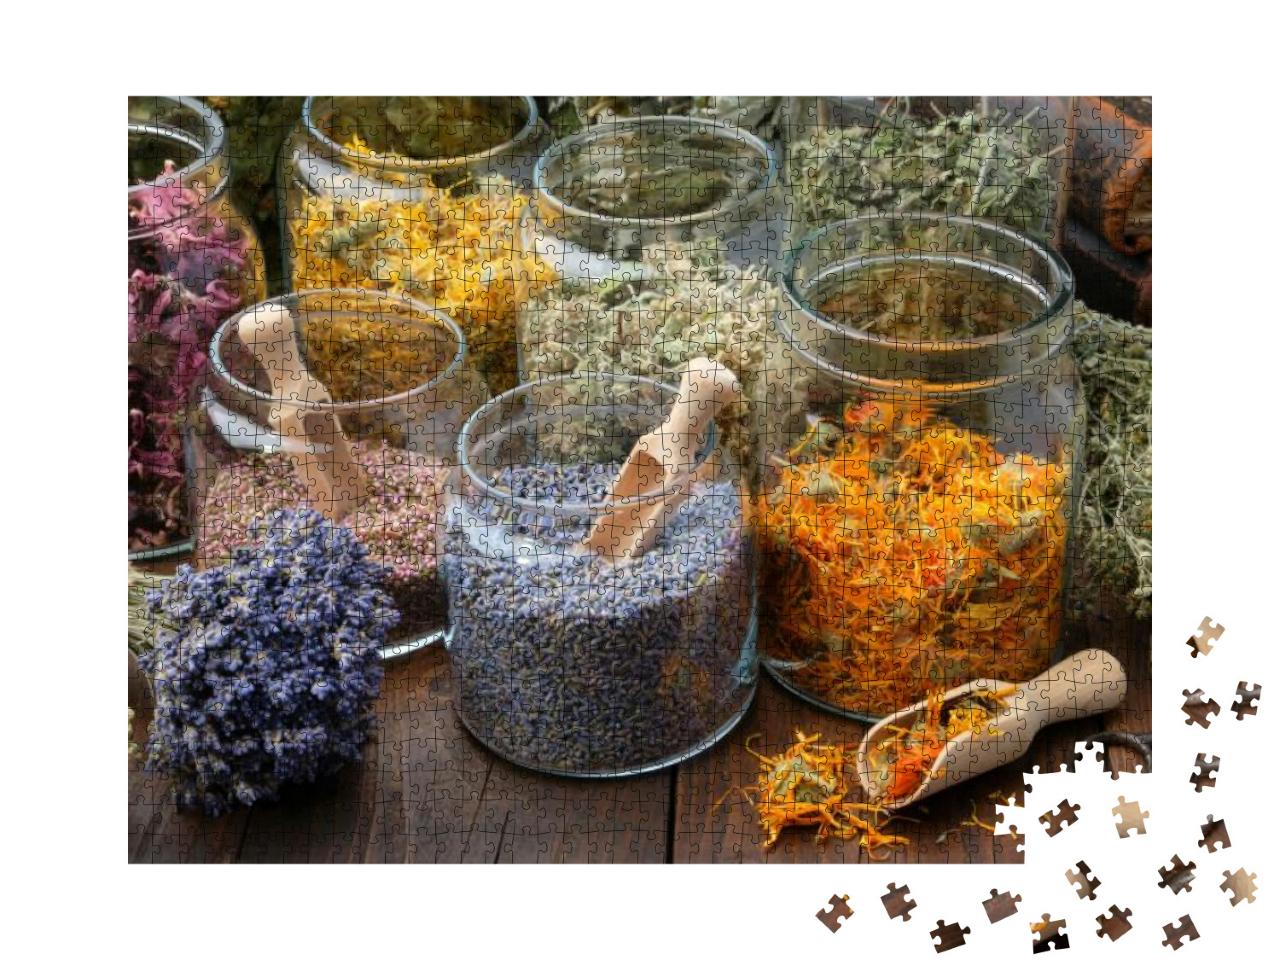 Glass Jars of Dry Lavender & Calendula Flowers. Jars of D... Jigsaw Puzzle with 1000 pieces